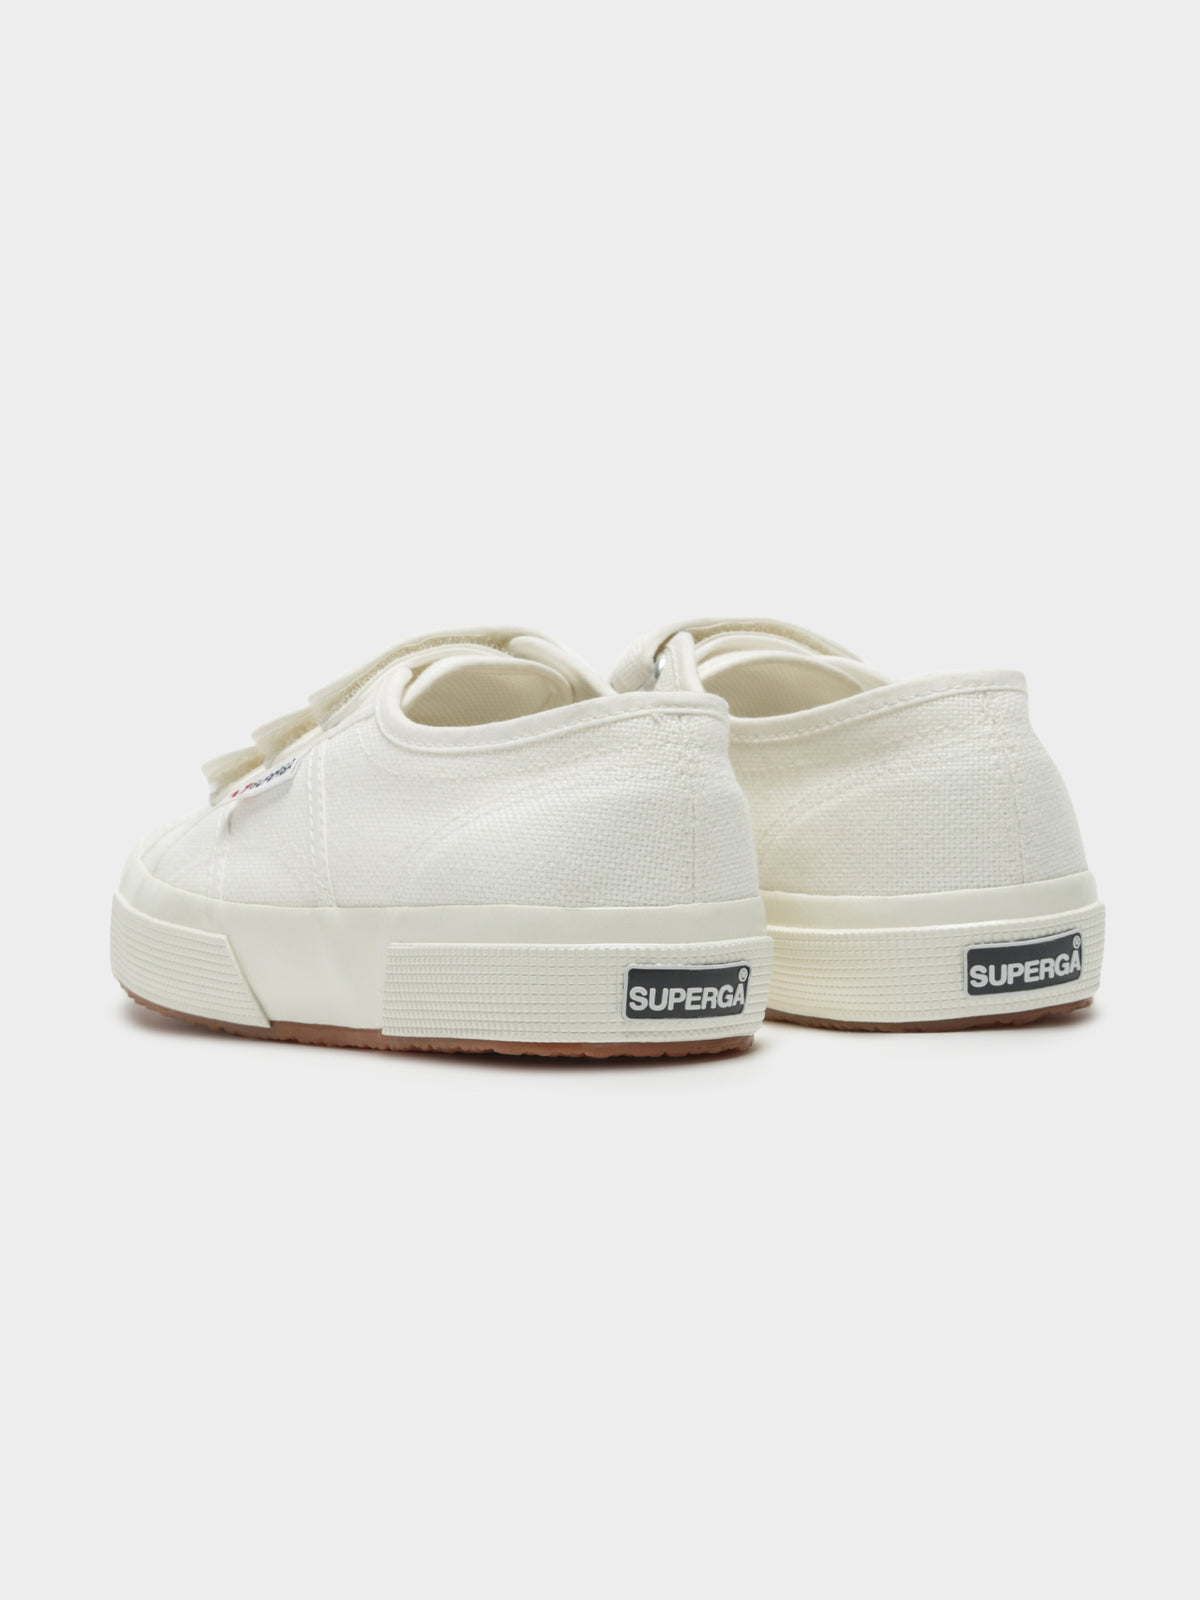 Unisex 2750 Strap Shiny Gum Sneakers in Off White